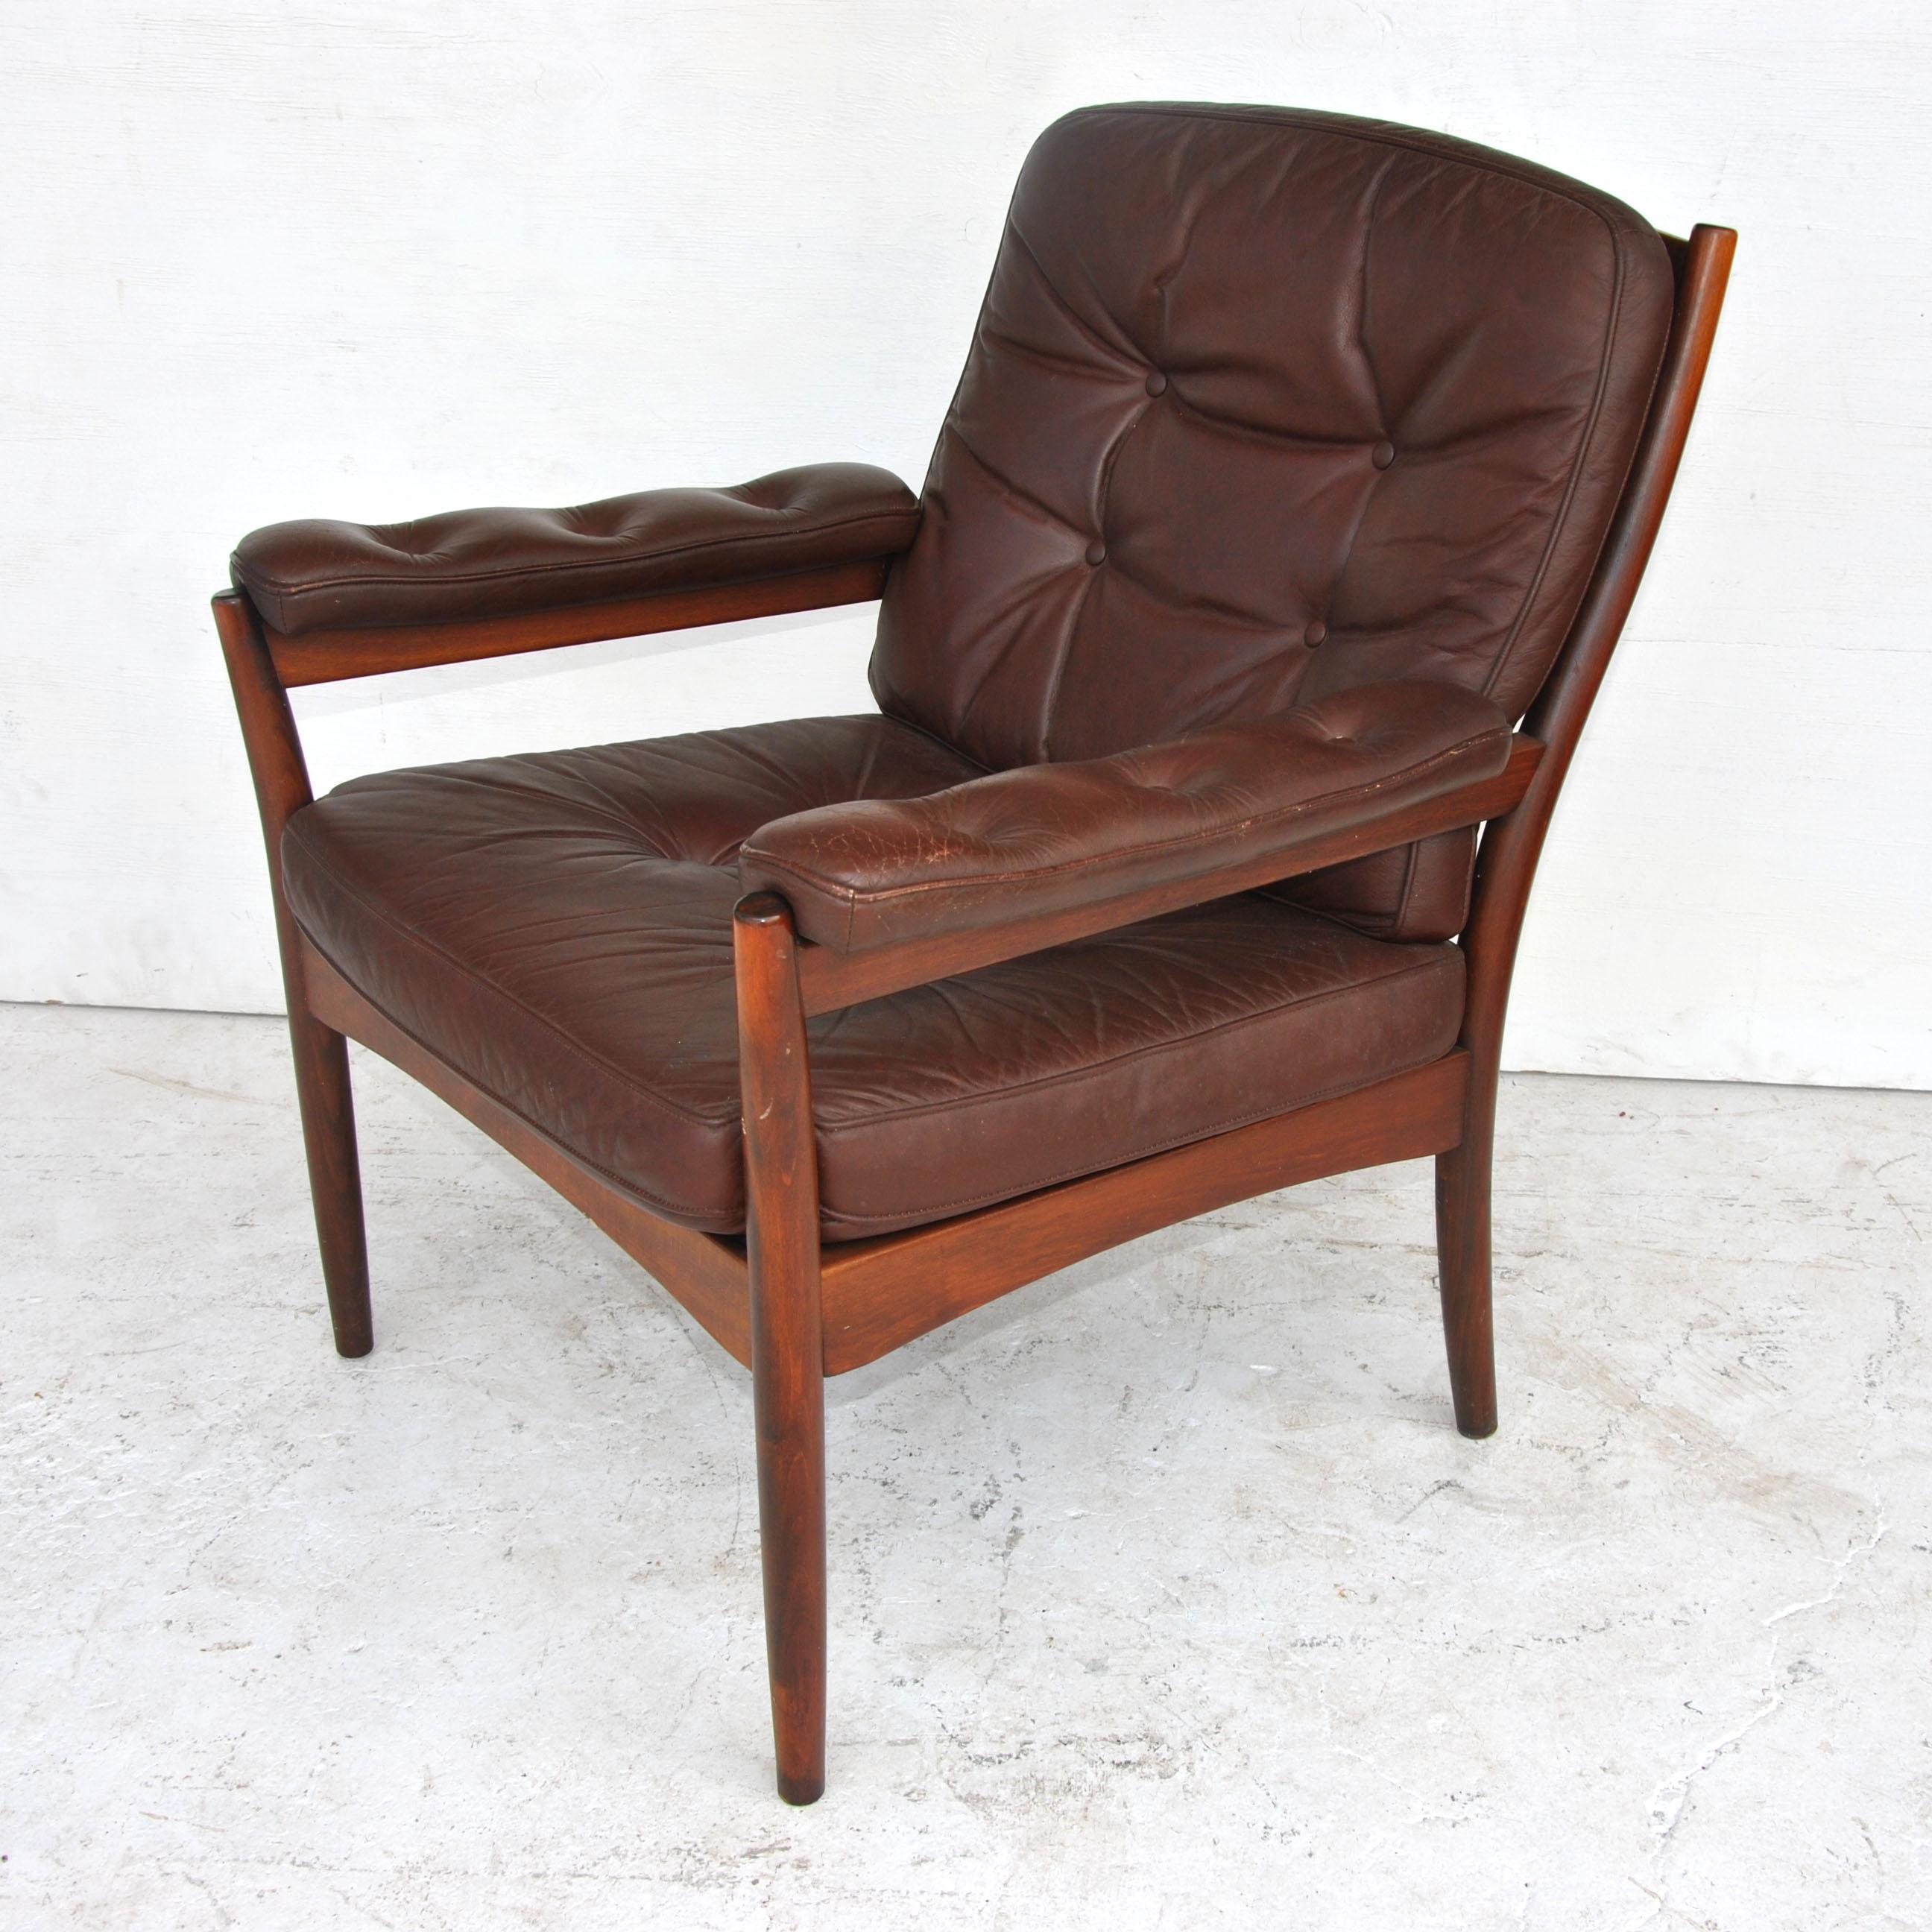 G-Möbel Scandinavian Walnut And Leather Lounge Chair In Good Condition For Sale In Pasadena, TX